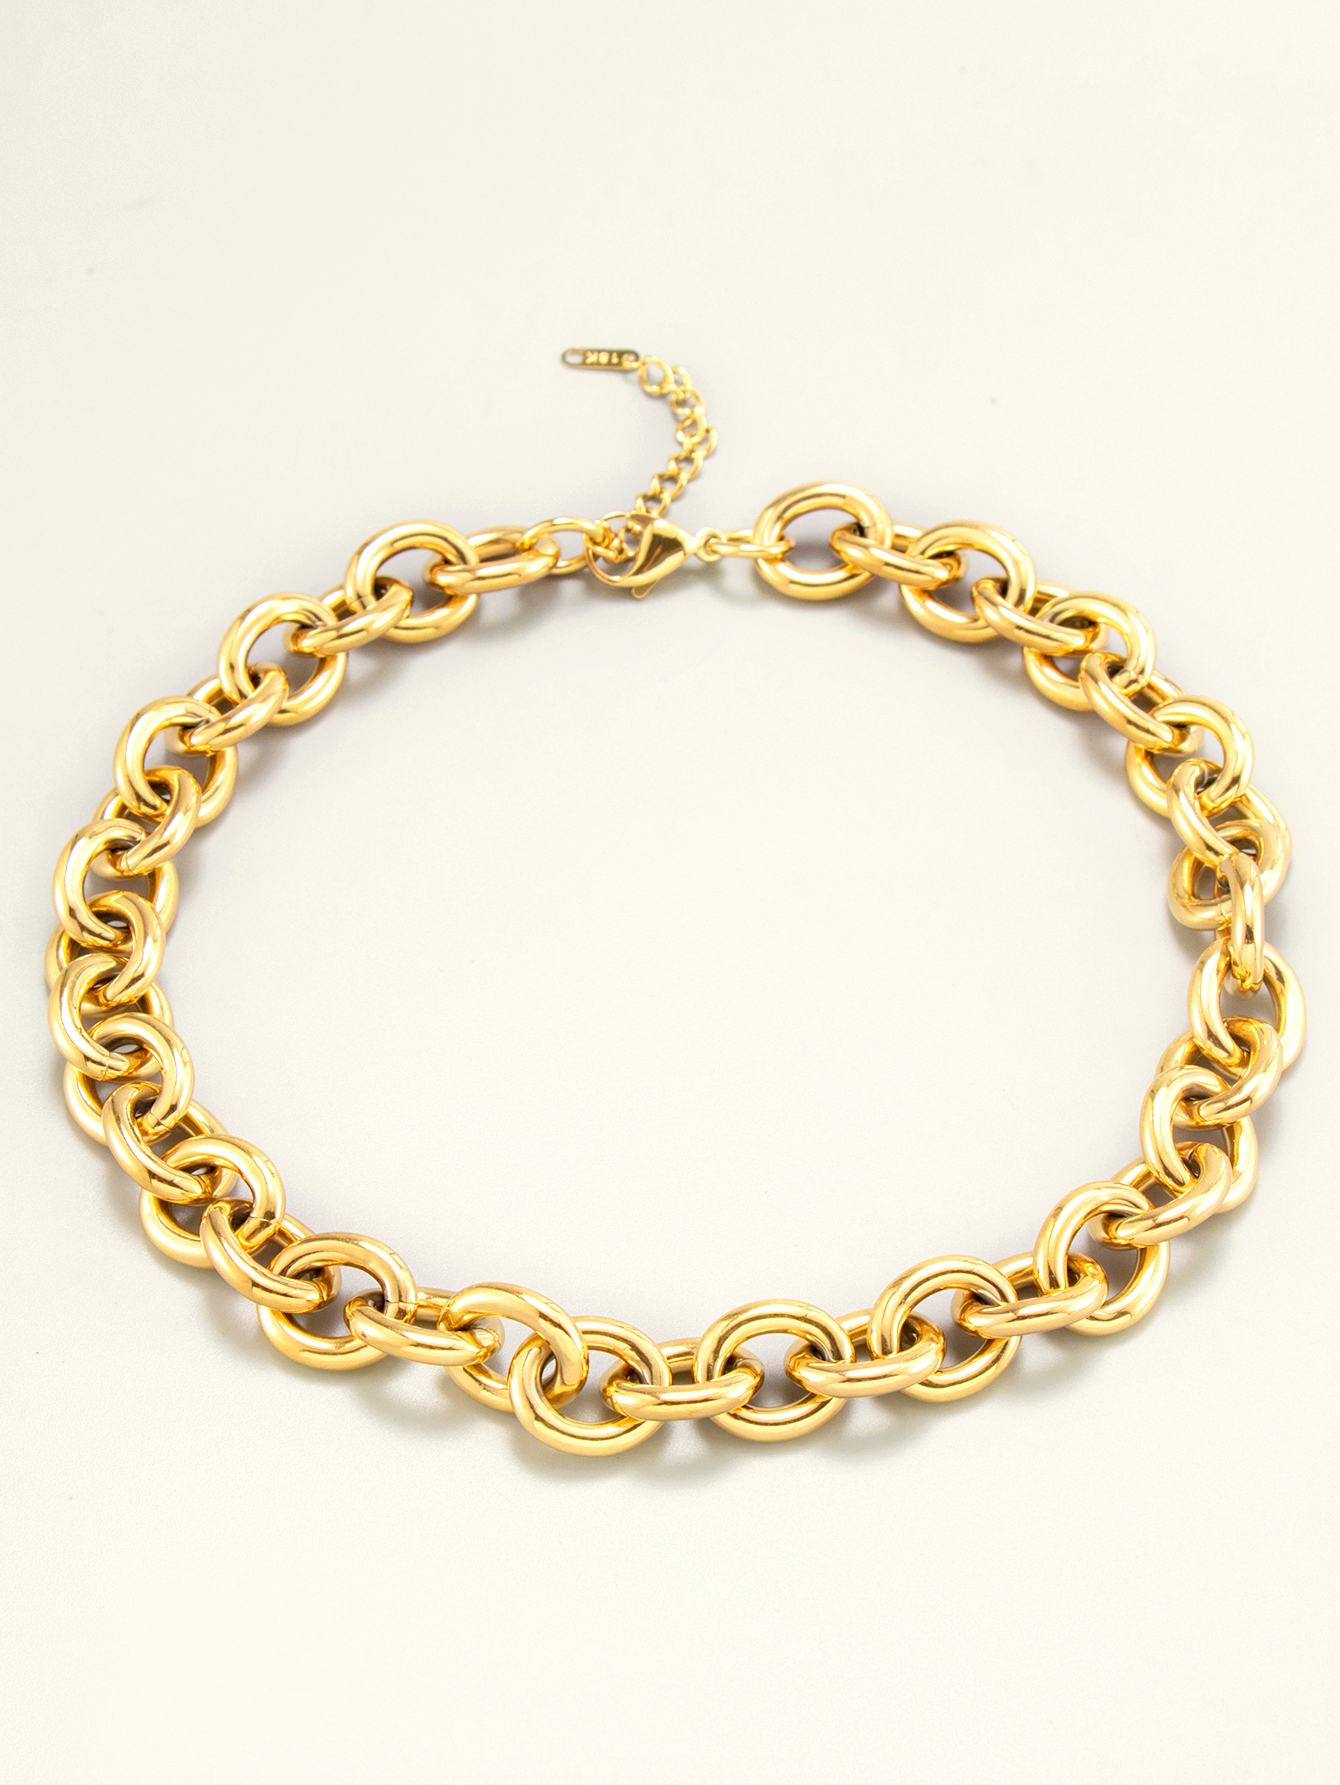 Gold chunky necklace